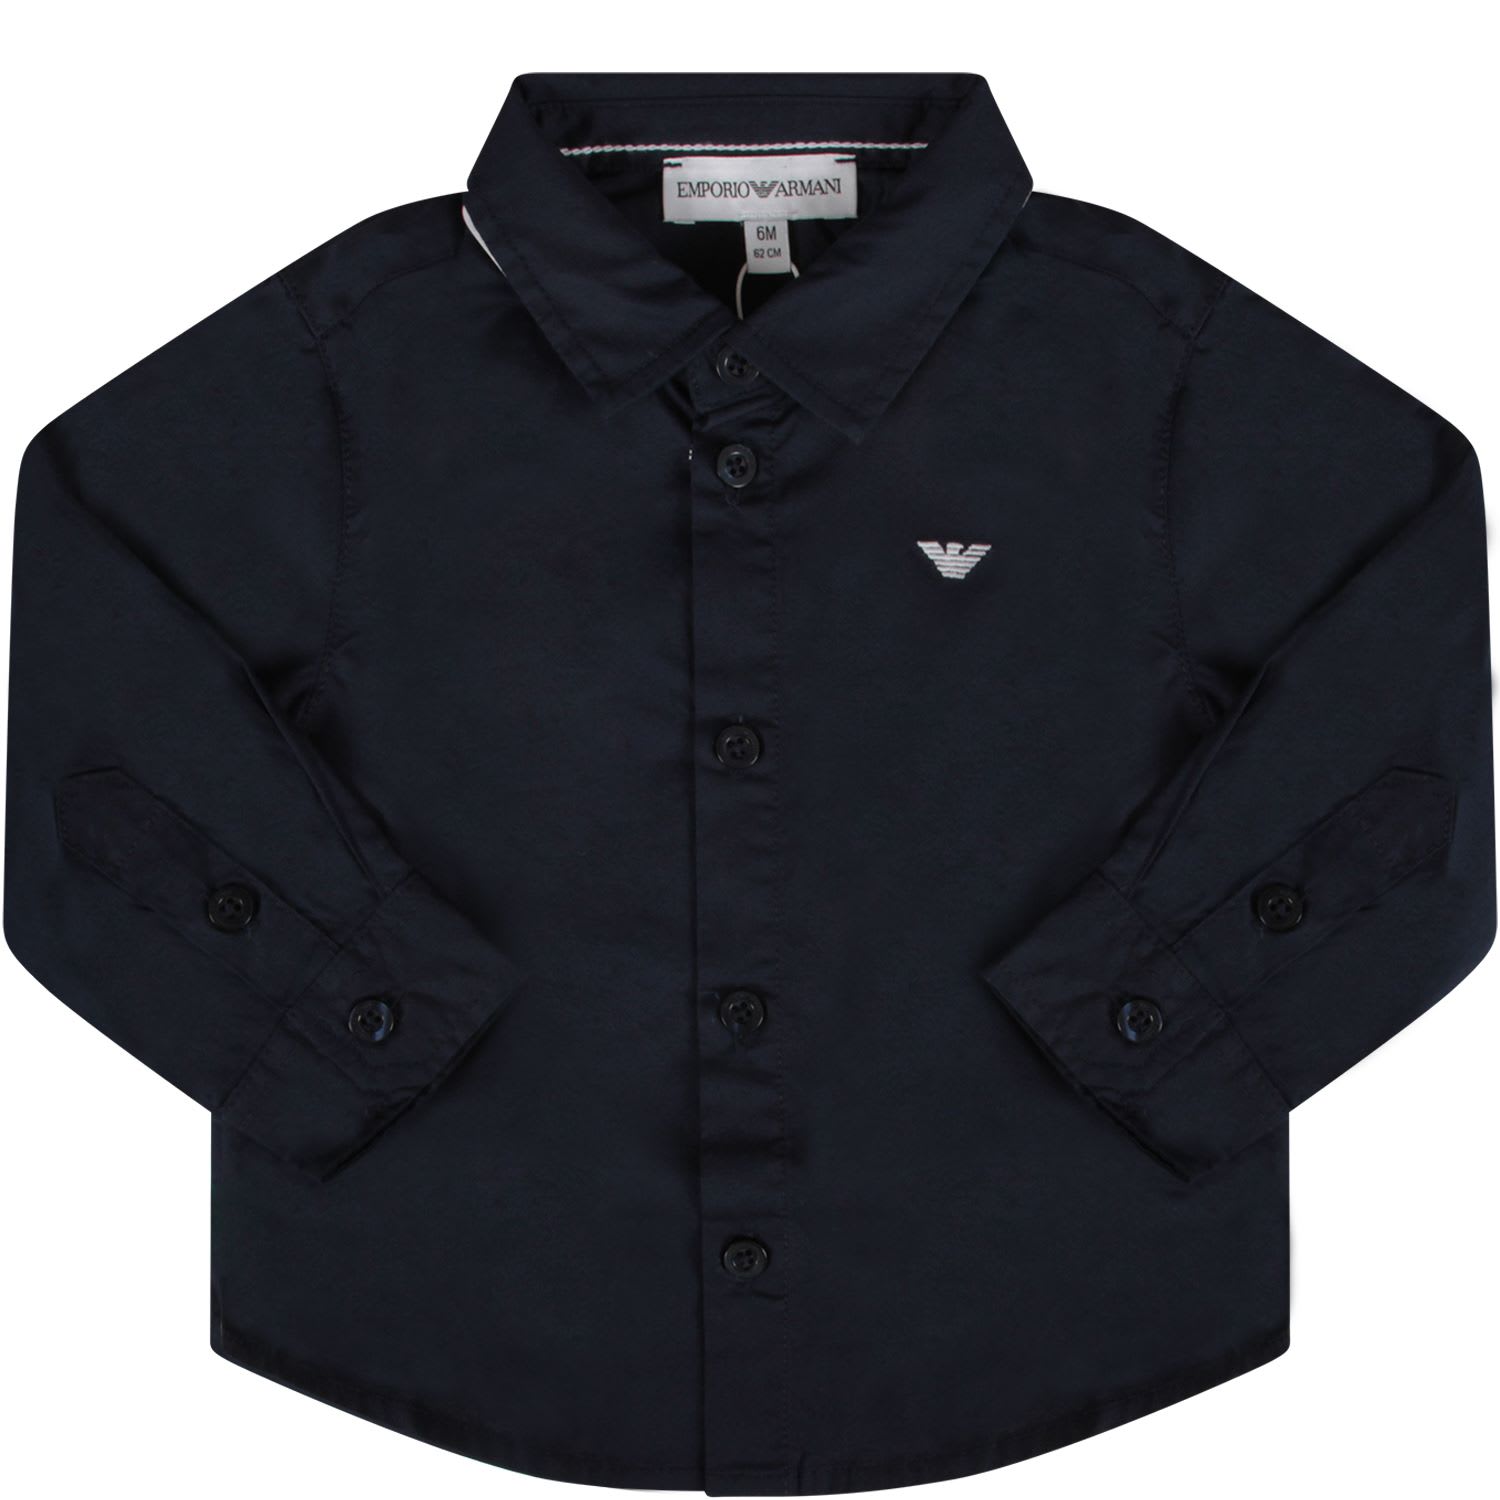 Armani Collezioni Blue Shirt For Baby Boy With Iconic Eagle